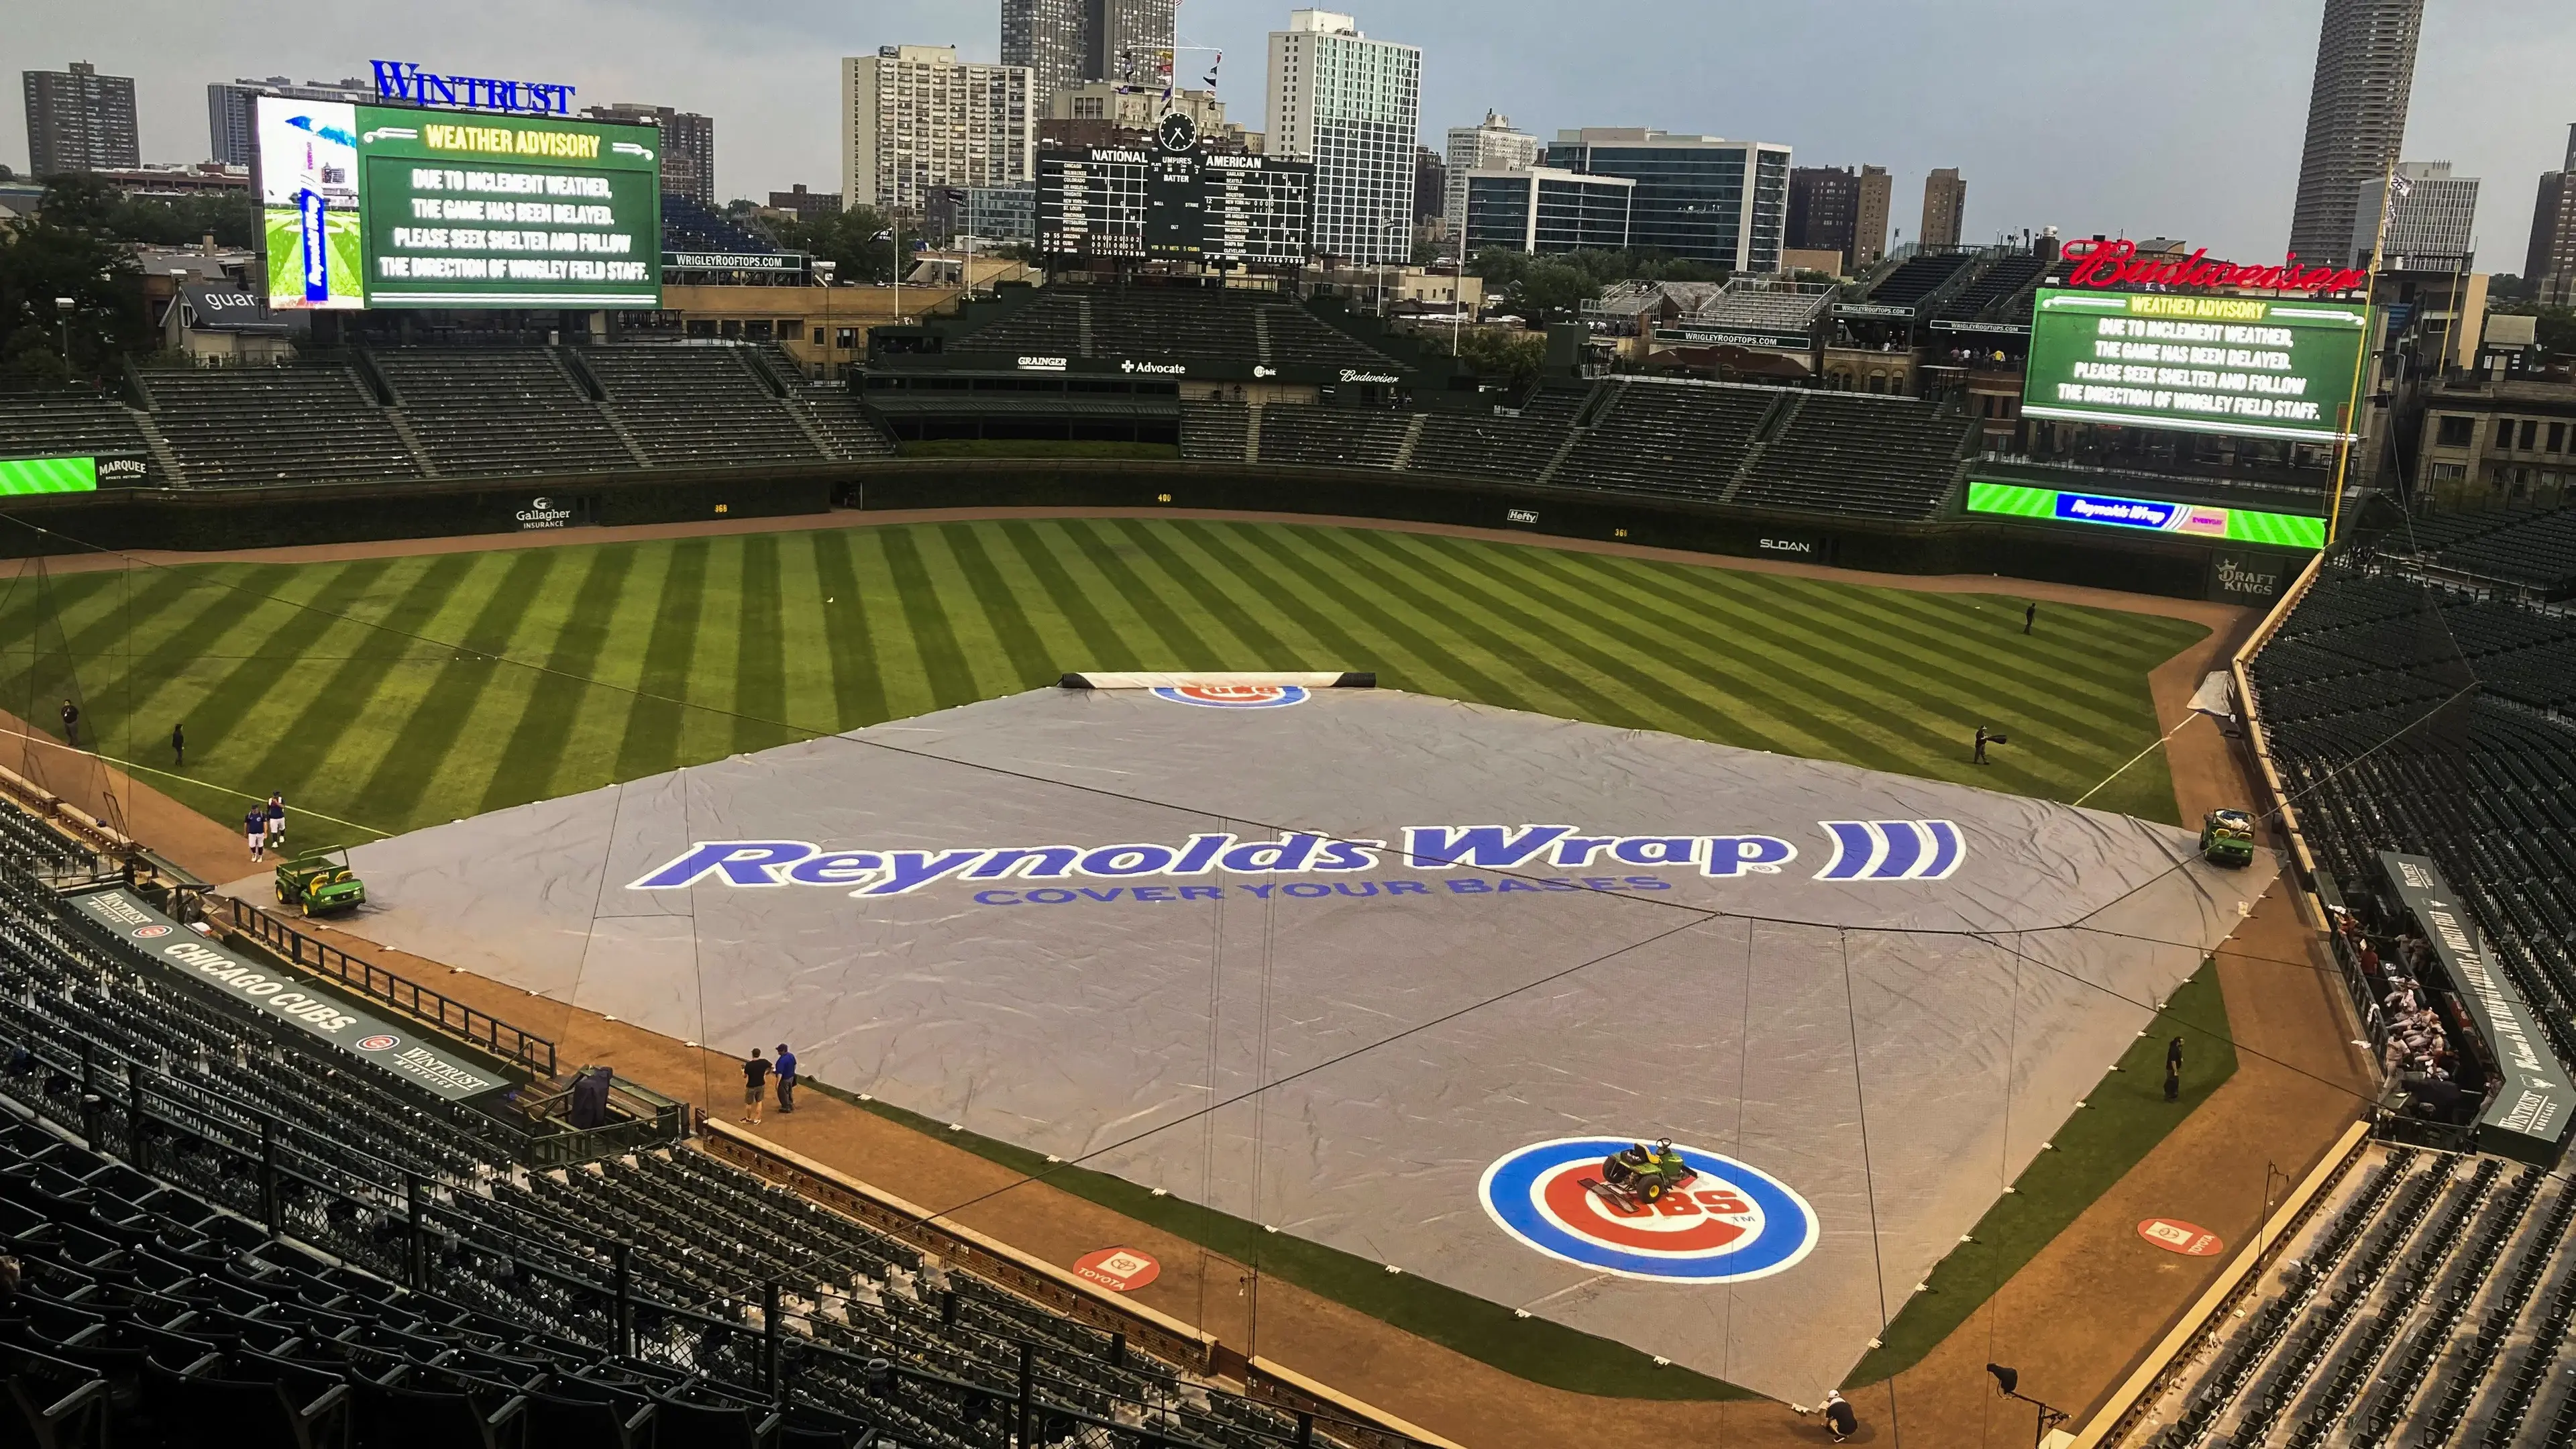 Jul 24, 2021; Chicago, Illinois, USA; Chicago Cubs grounds crew members place the tarp during a rain delay in the ninth inning against the Arizona Diamondbacks at Wrigley Field. Mandatory Credit: Matt Marton-USA TODAY Sports / Matt Marton-USA TODAY Sports